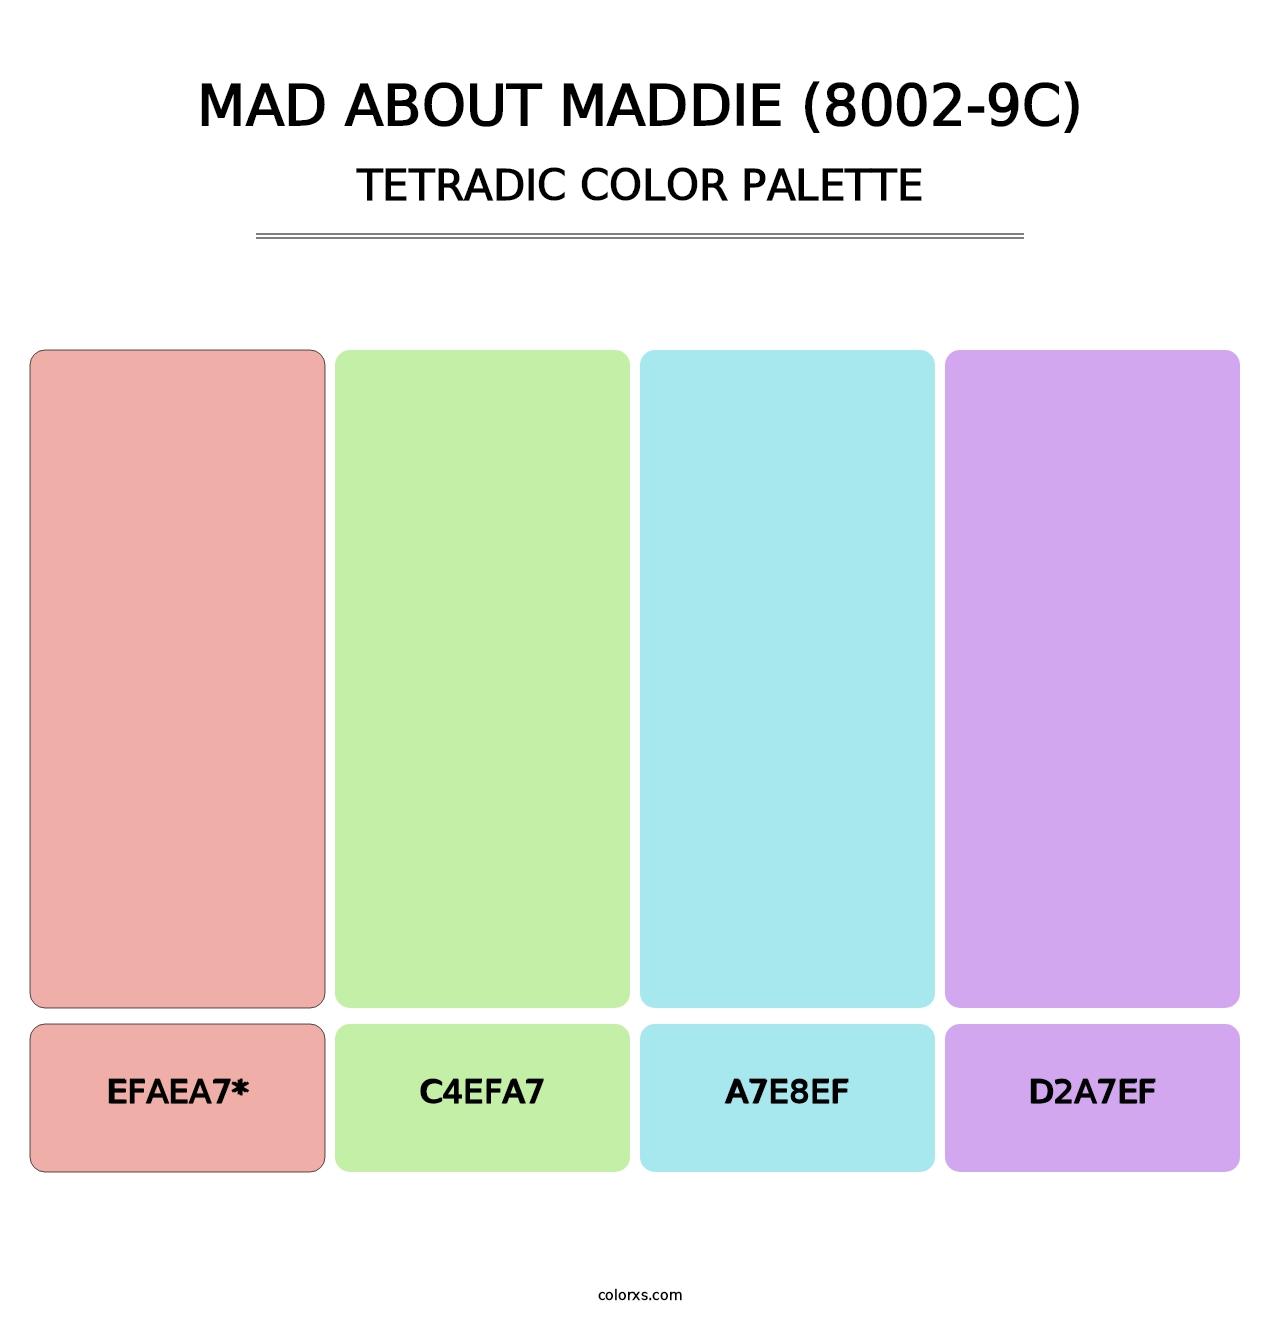 Mad About Maddie (8002-9C) - Tetradic Color Palette